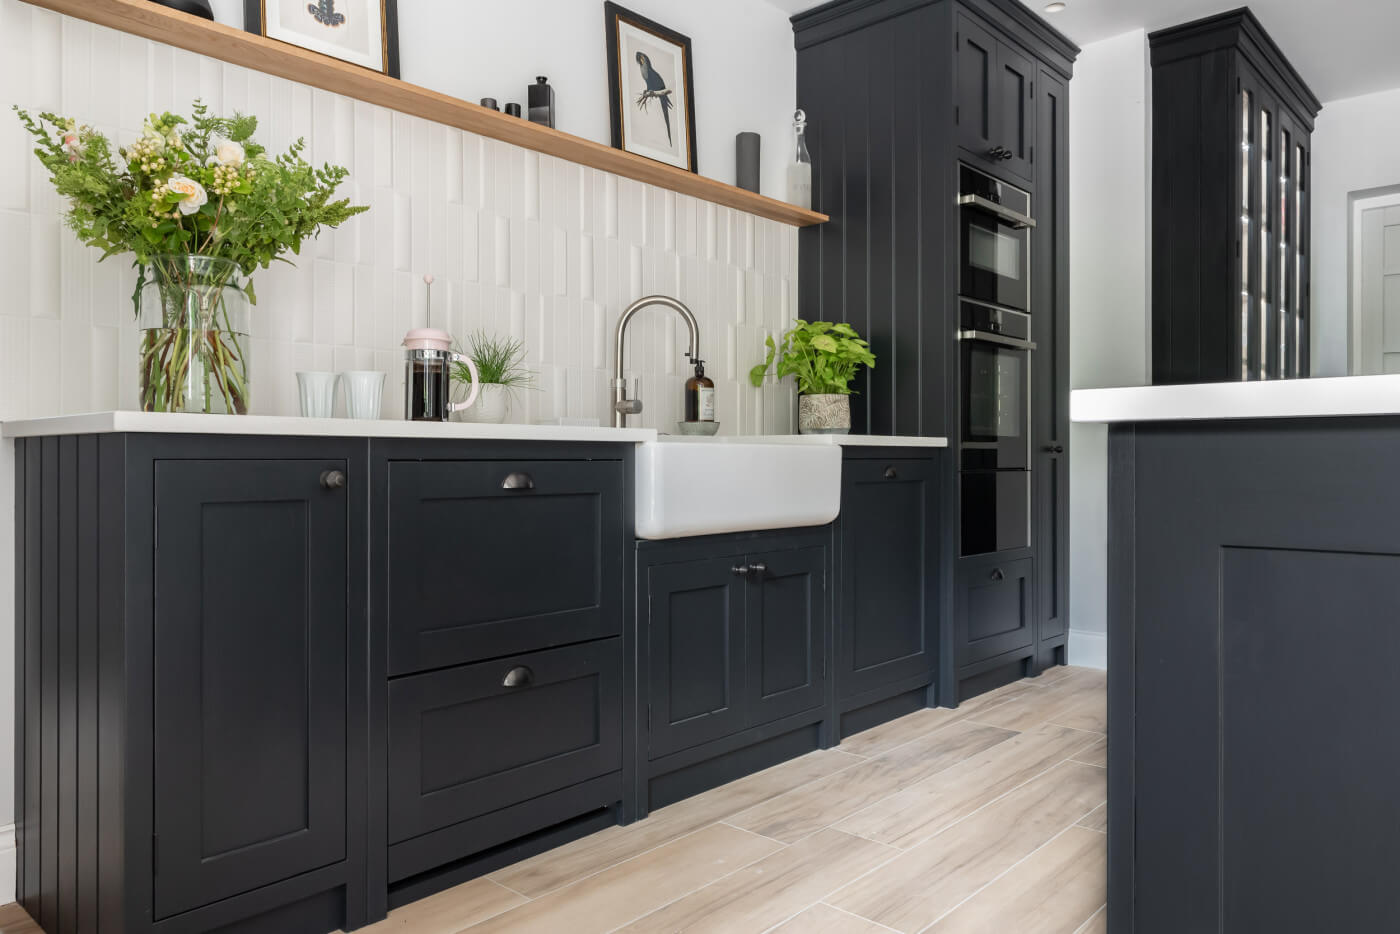 Luxuriously dark cabinetry with a white sink by Shaws of Darwen